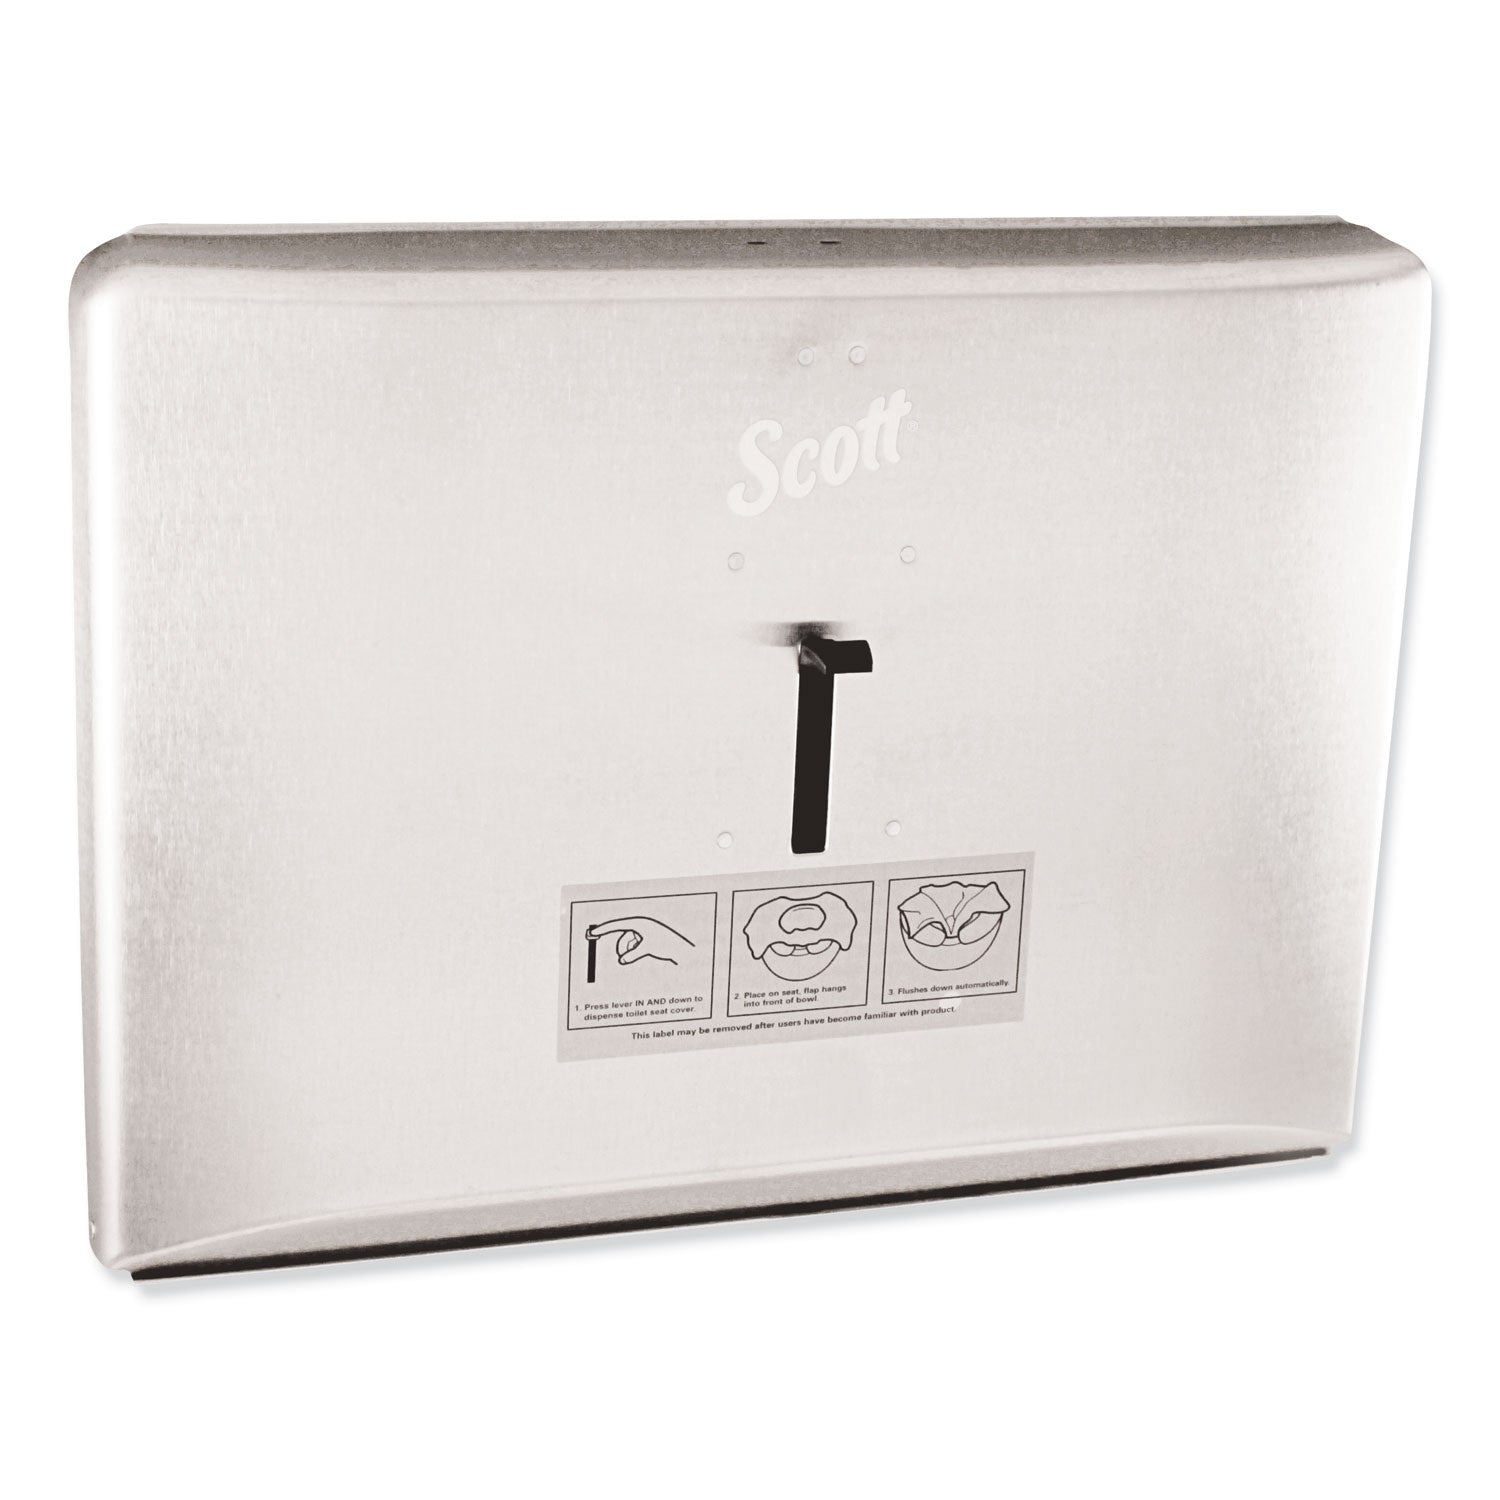 personal-seat-cover-dispenser-166-x-25-x-123-stainless-steel_kcc09512 - 1